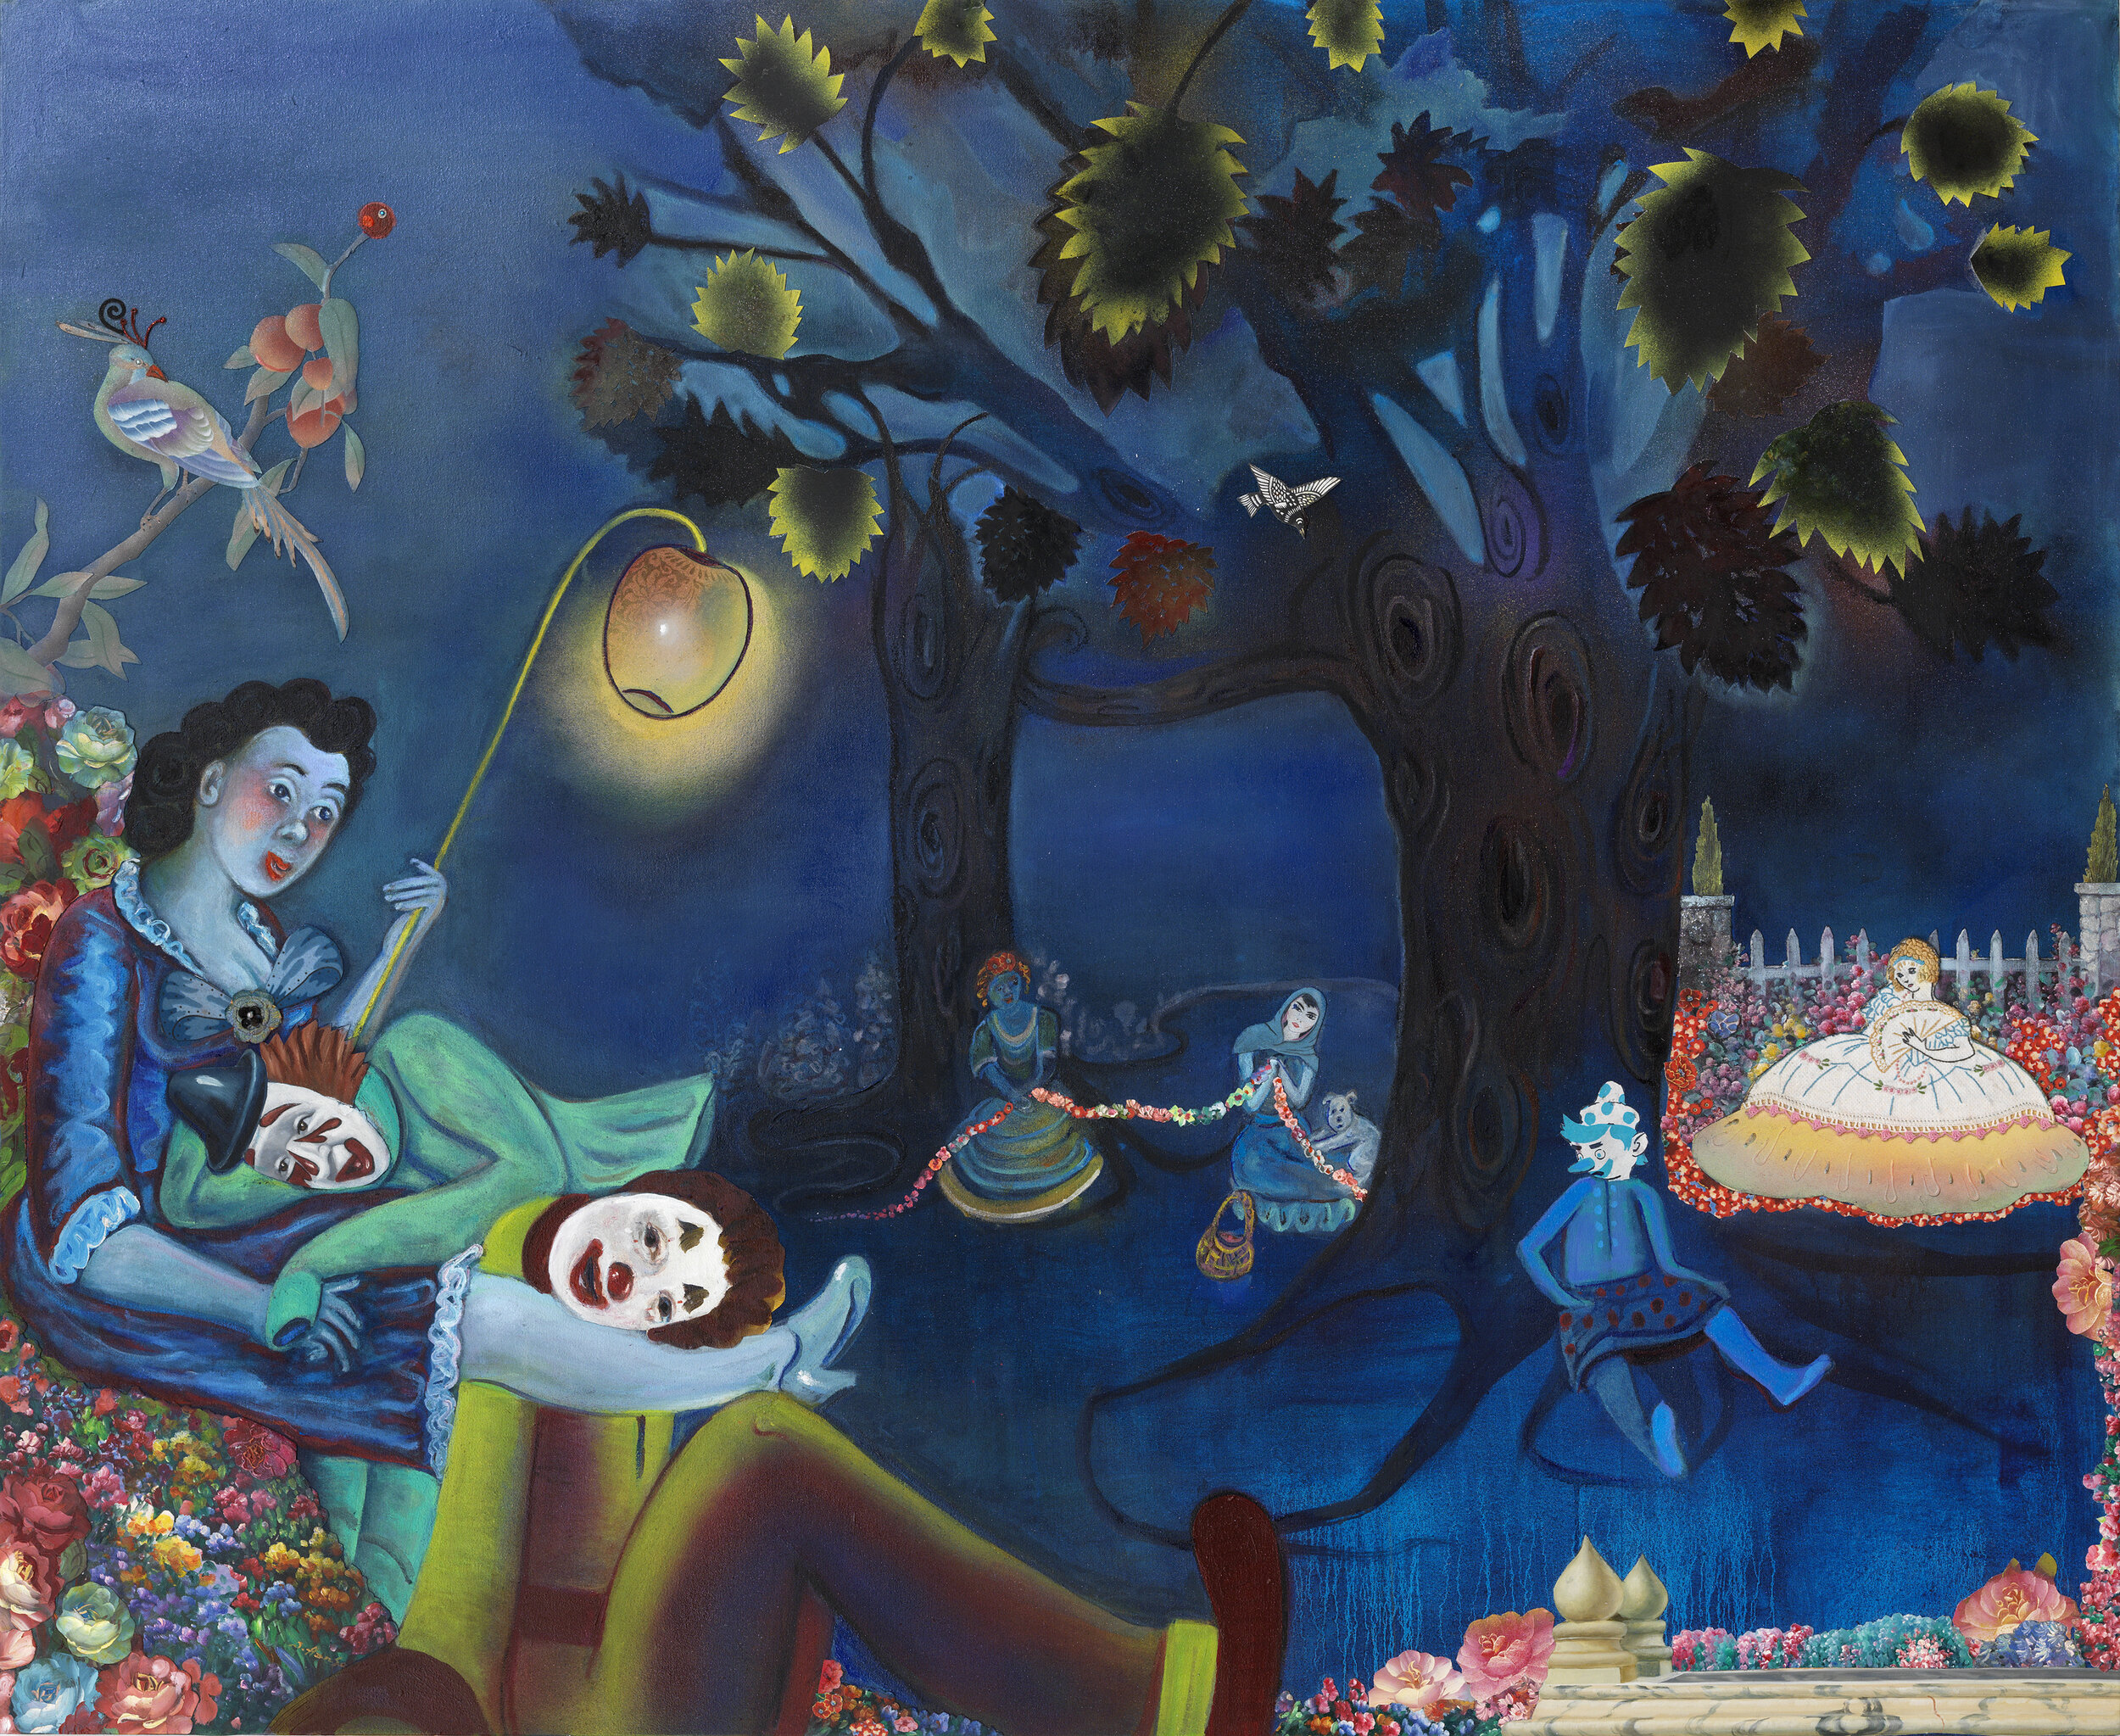 Paramours and Mischief (at night), 54" × 64", mixed media and collage on canvas, 2011